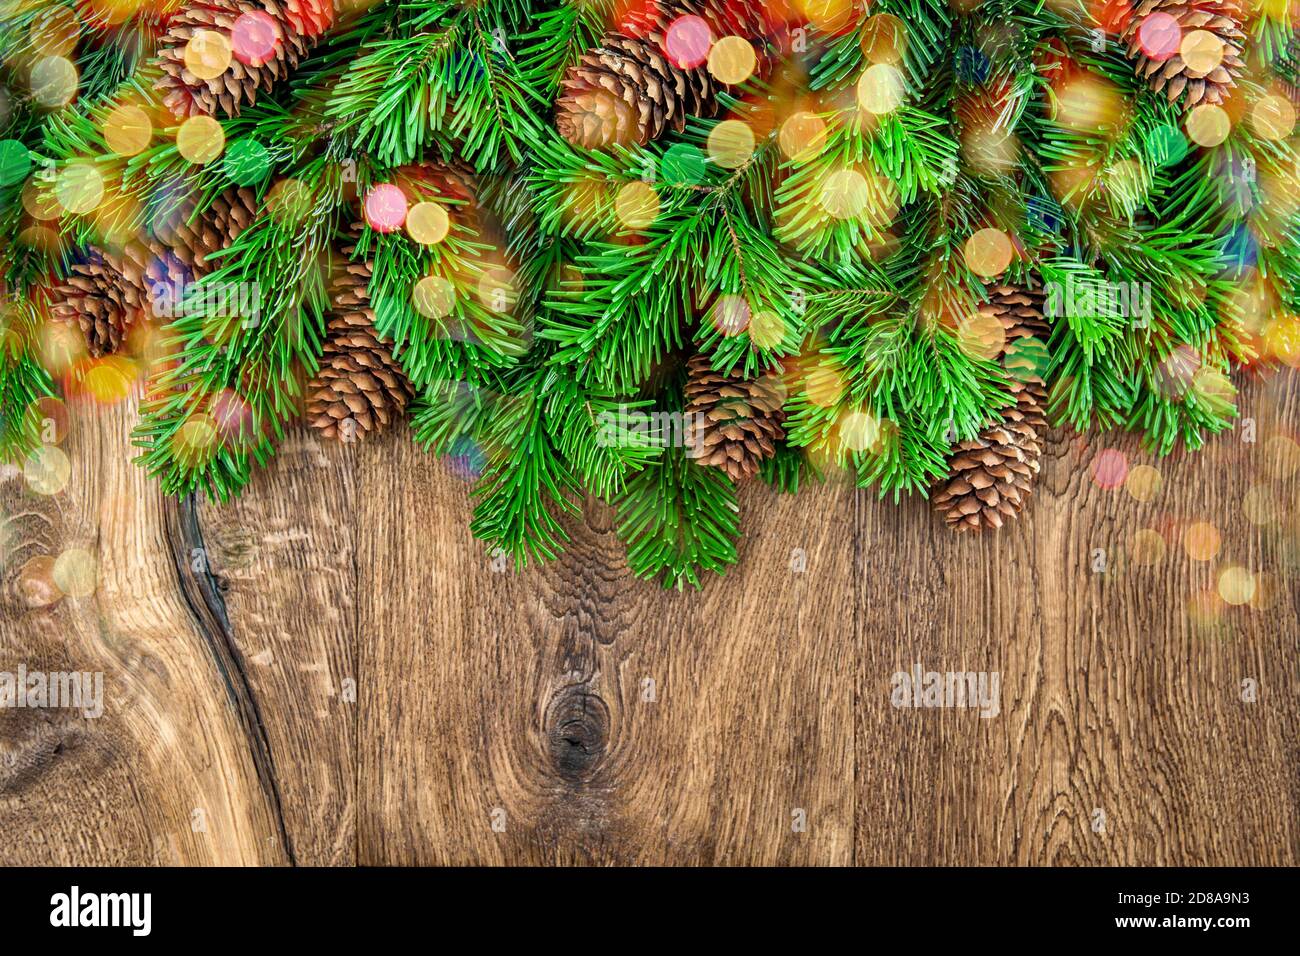 Christmas decoration colorful lights on wooden background Stock Photo